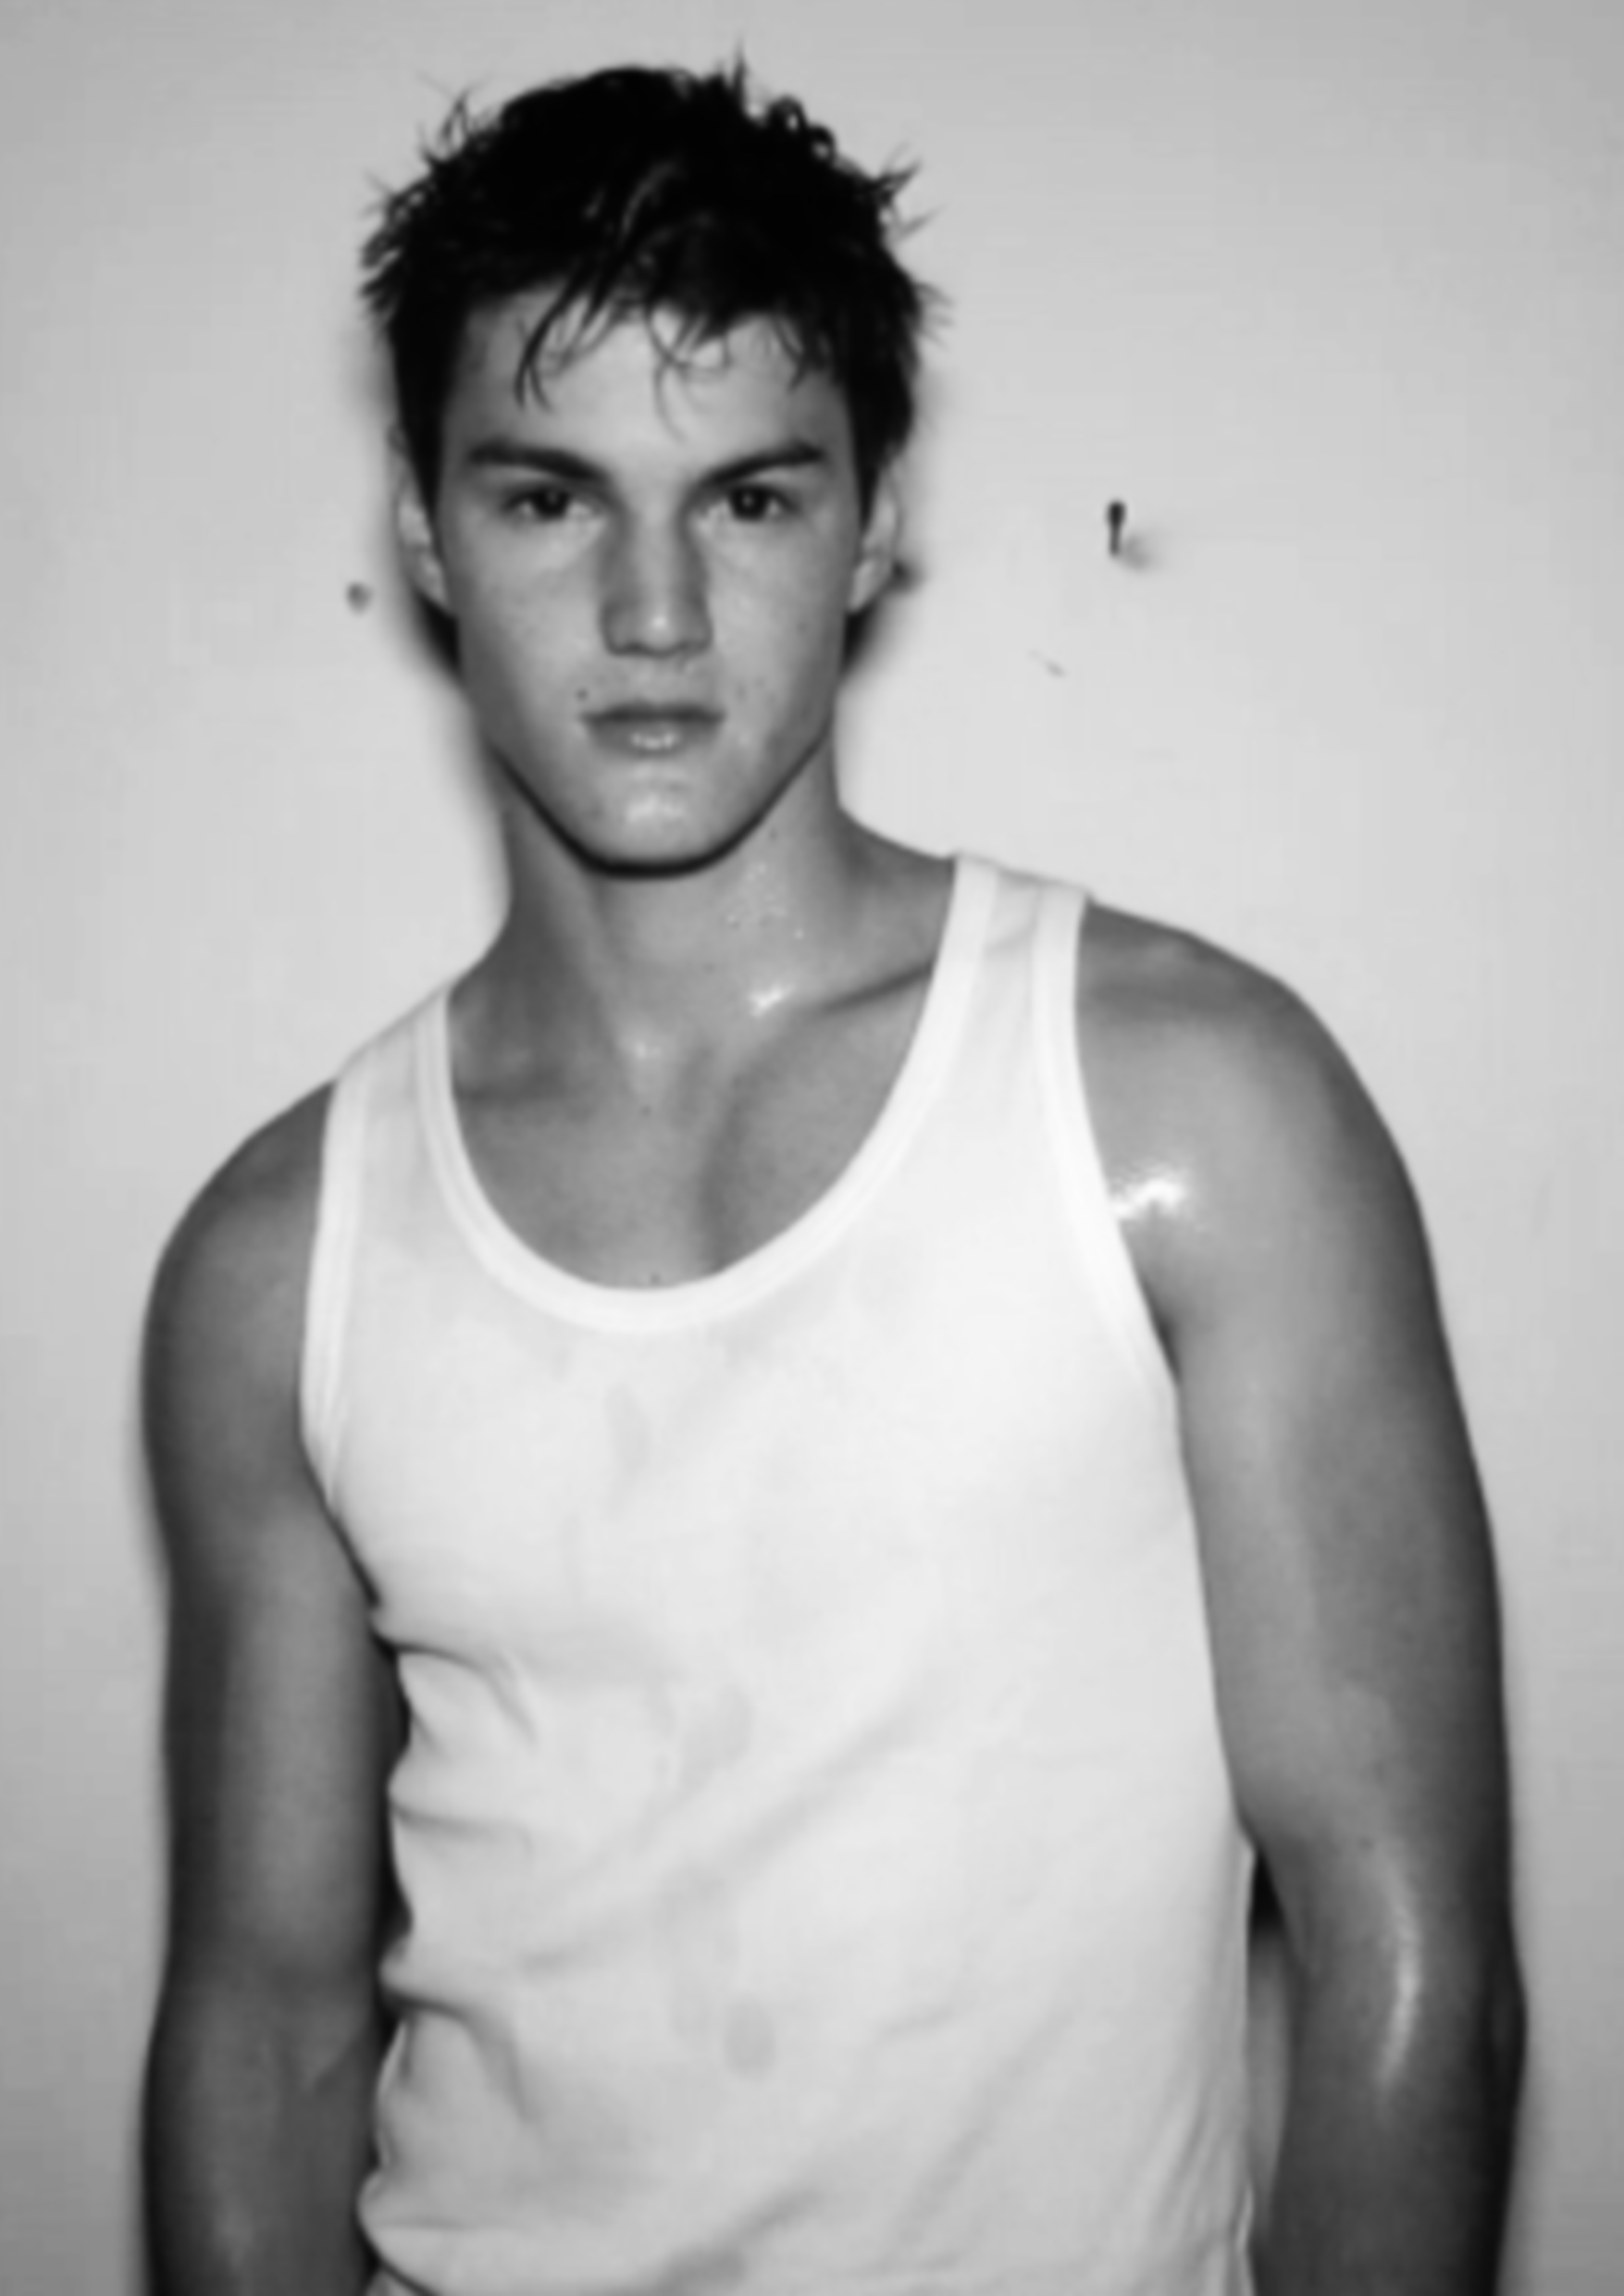 Jacob Files from San Diego at DT Model Management by Ron Wan in Hong Kong.